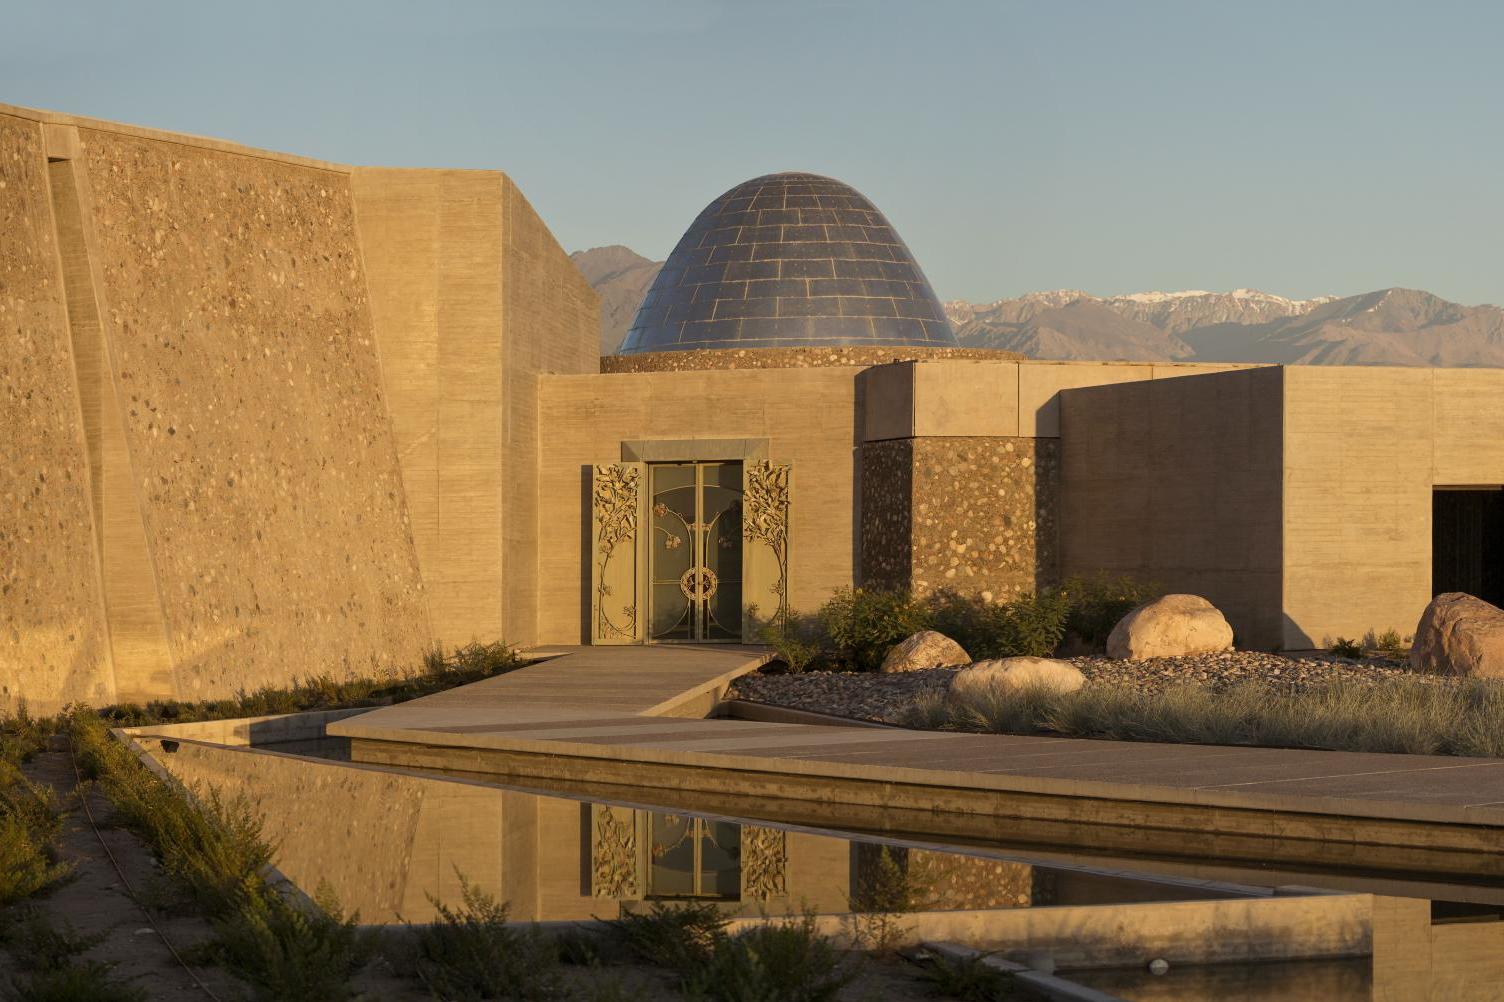 Zuccardi Valle de Uco stands out for all the right reasons